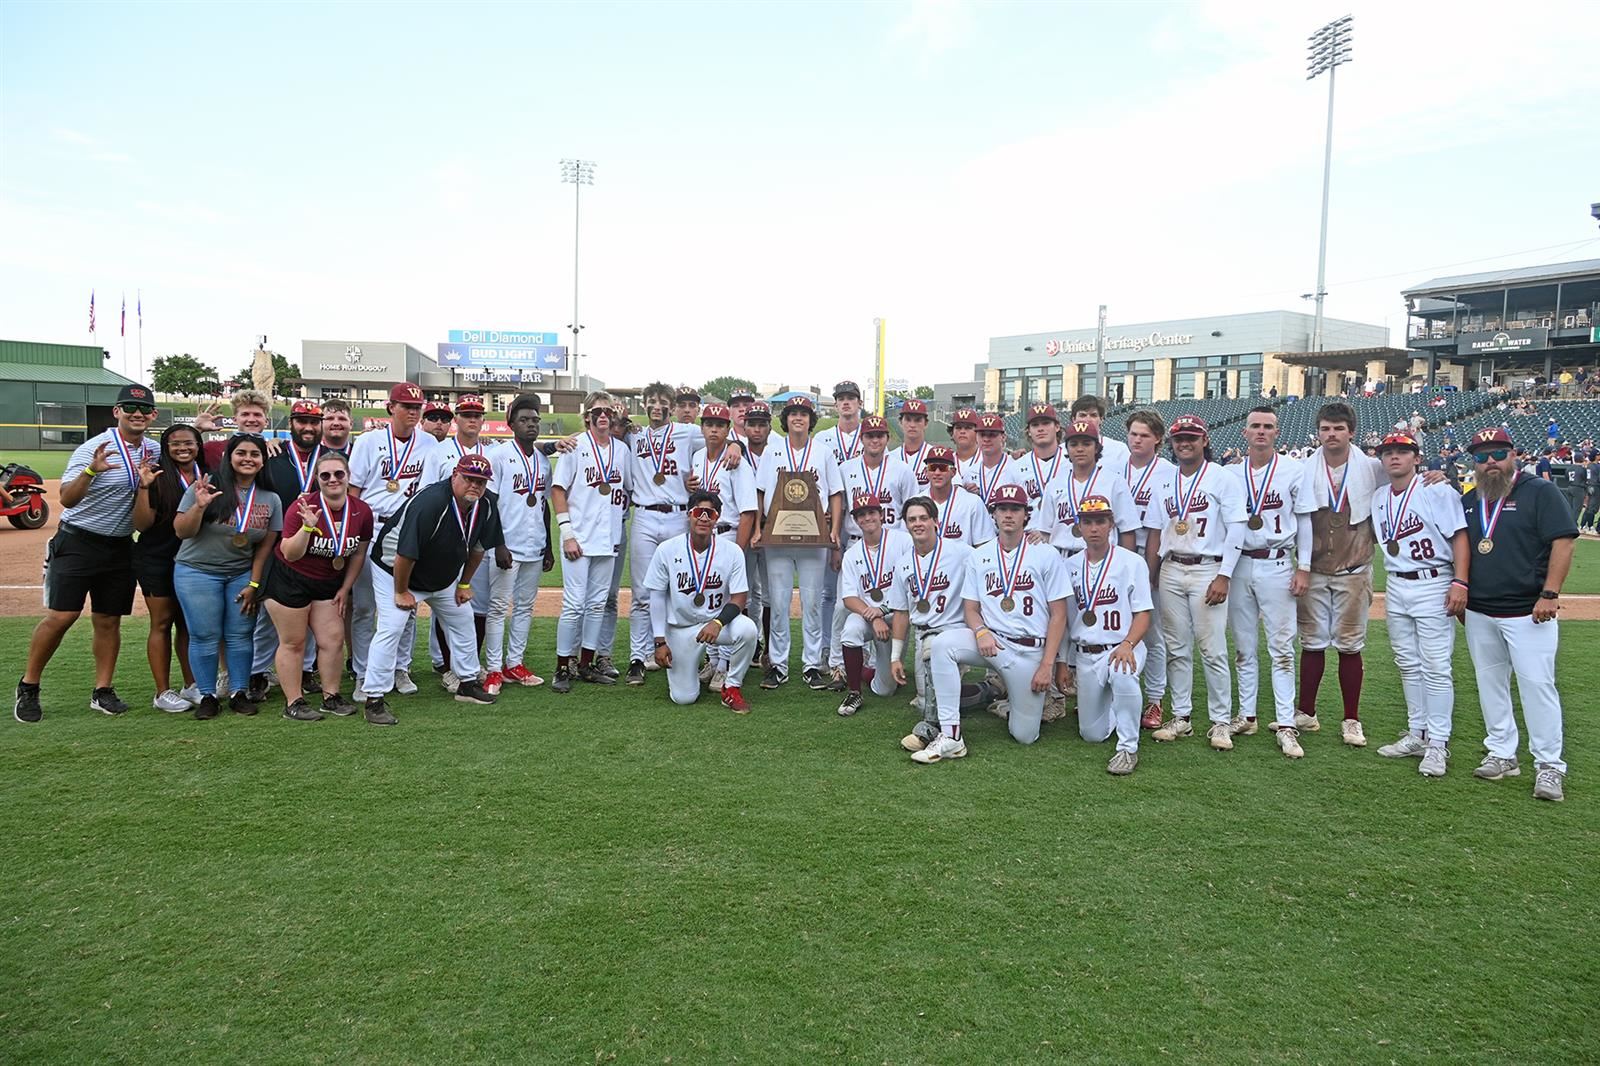 The Cypress Woods High School baseball team poses for photos following its Class 6A state semifinal game.